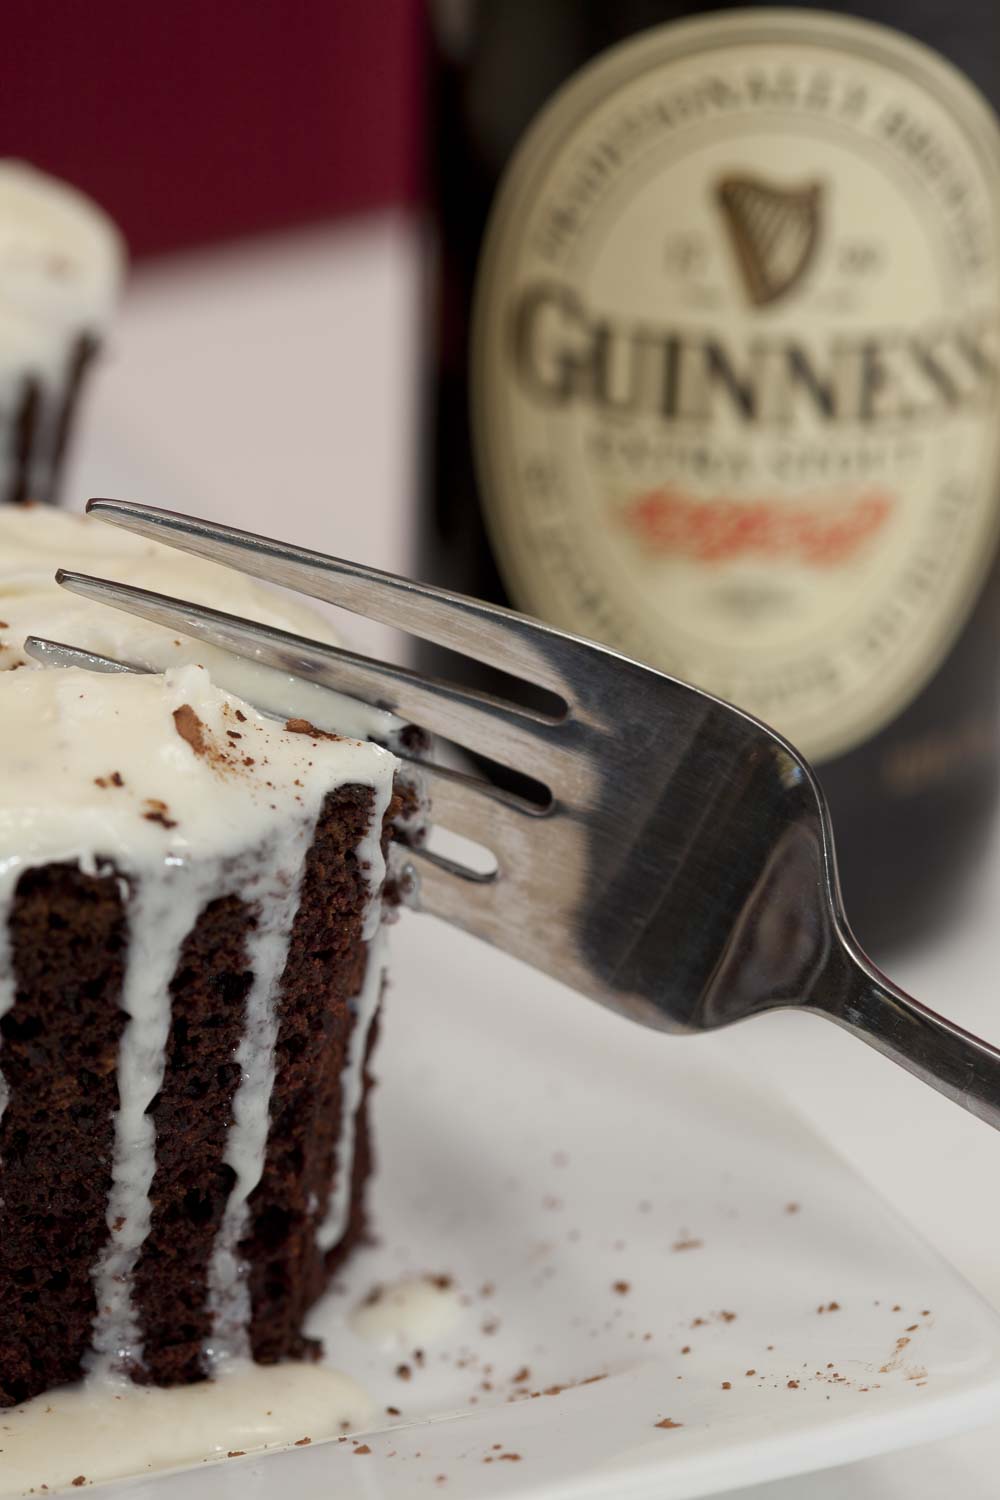 Guinness Cake on Plate with Fok